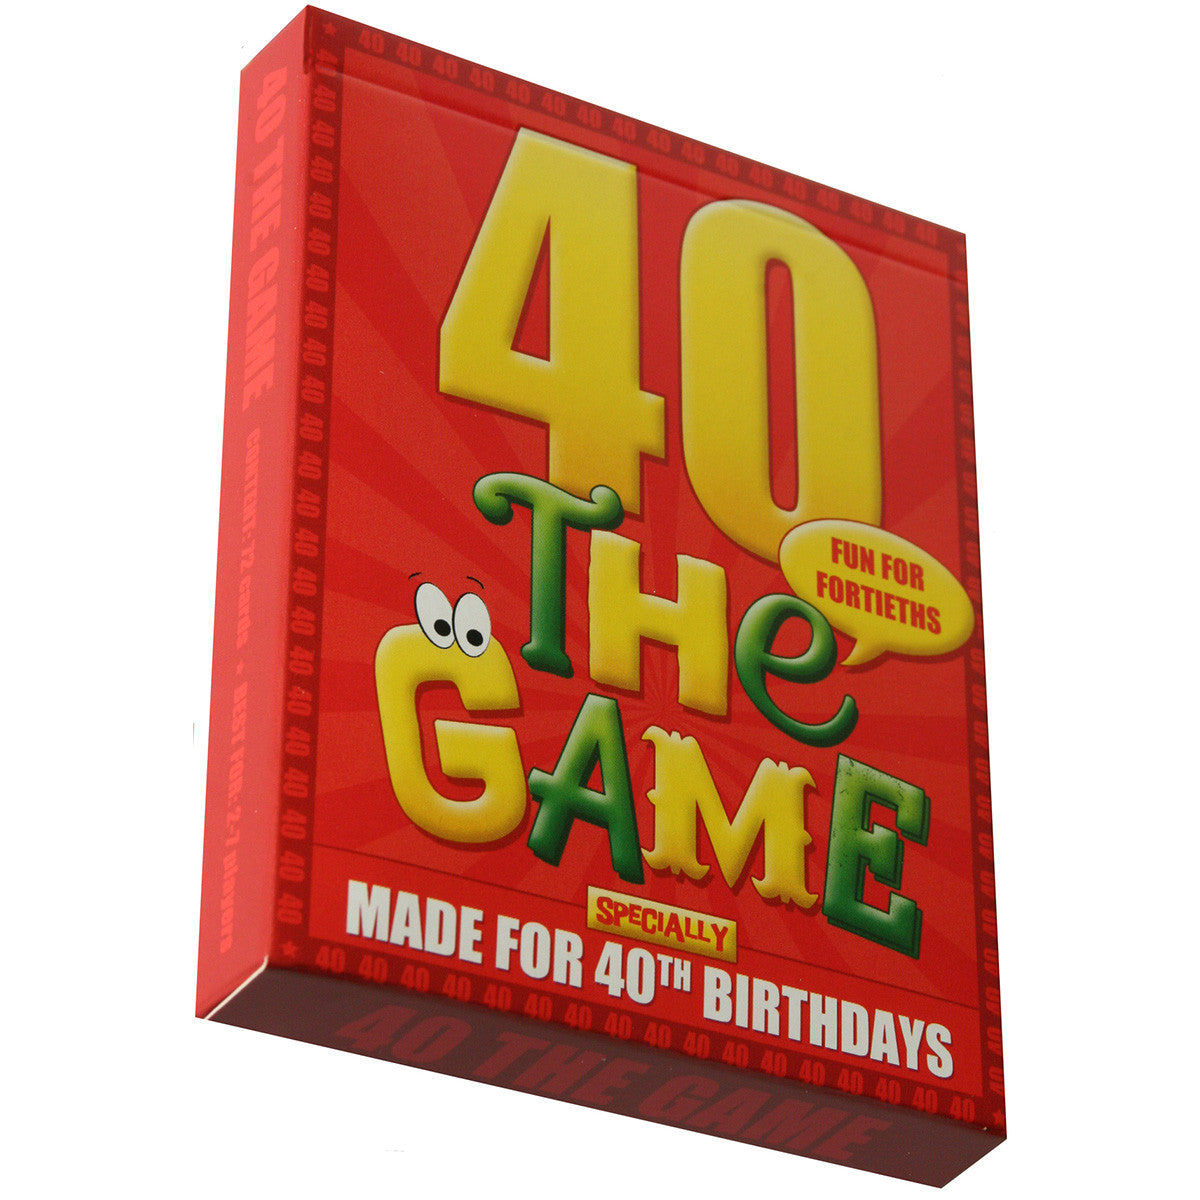 40+ Great Card Games For All Occasions